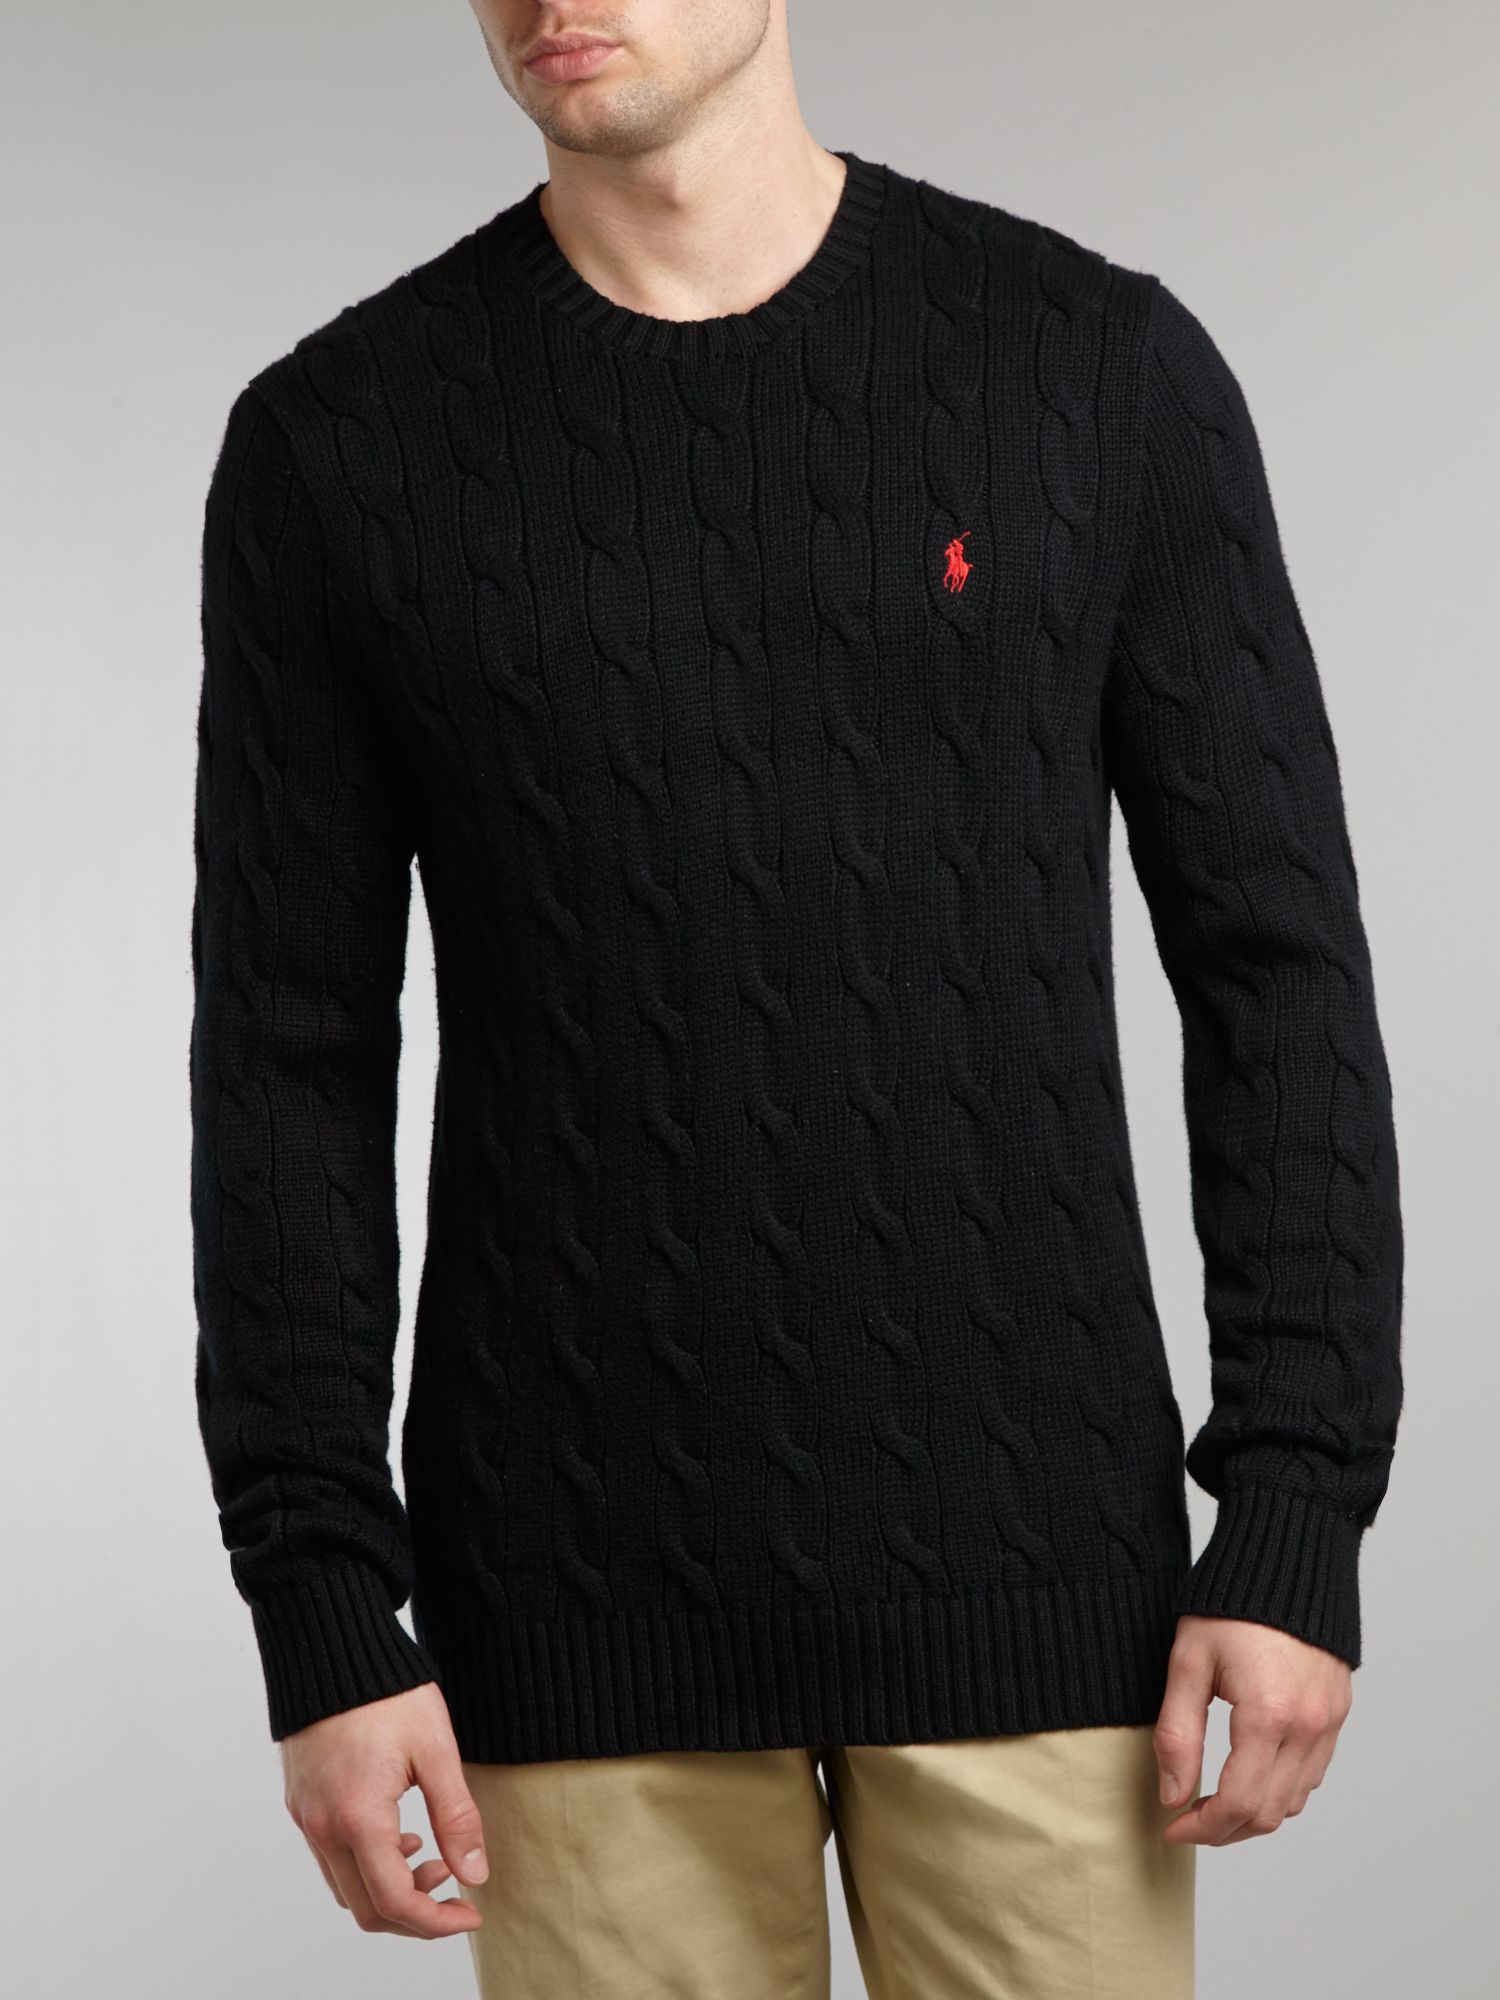 solid black polo shirts red ralph lauren cable knit jumper